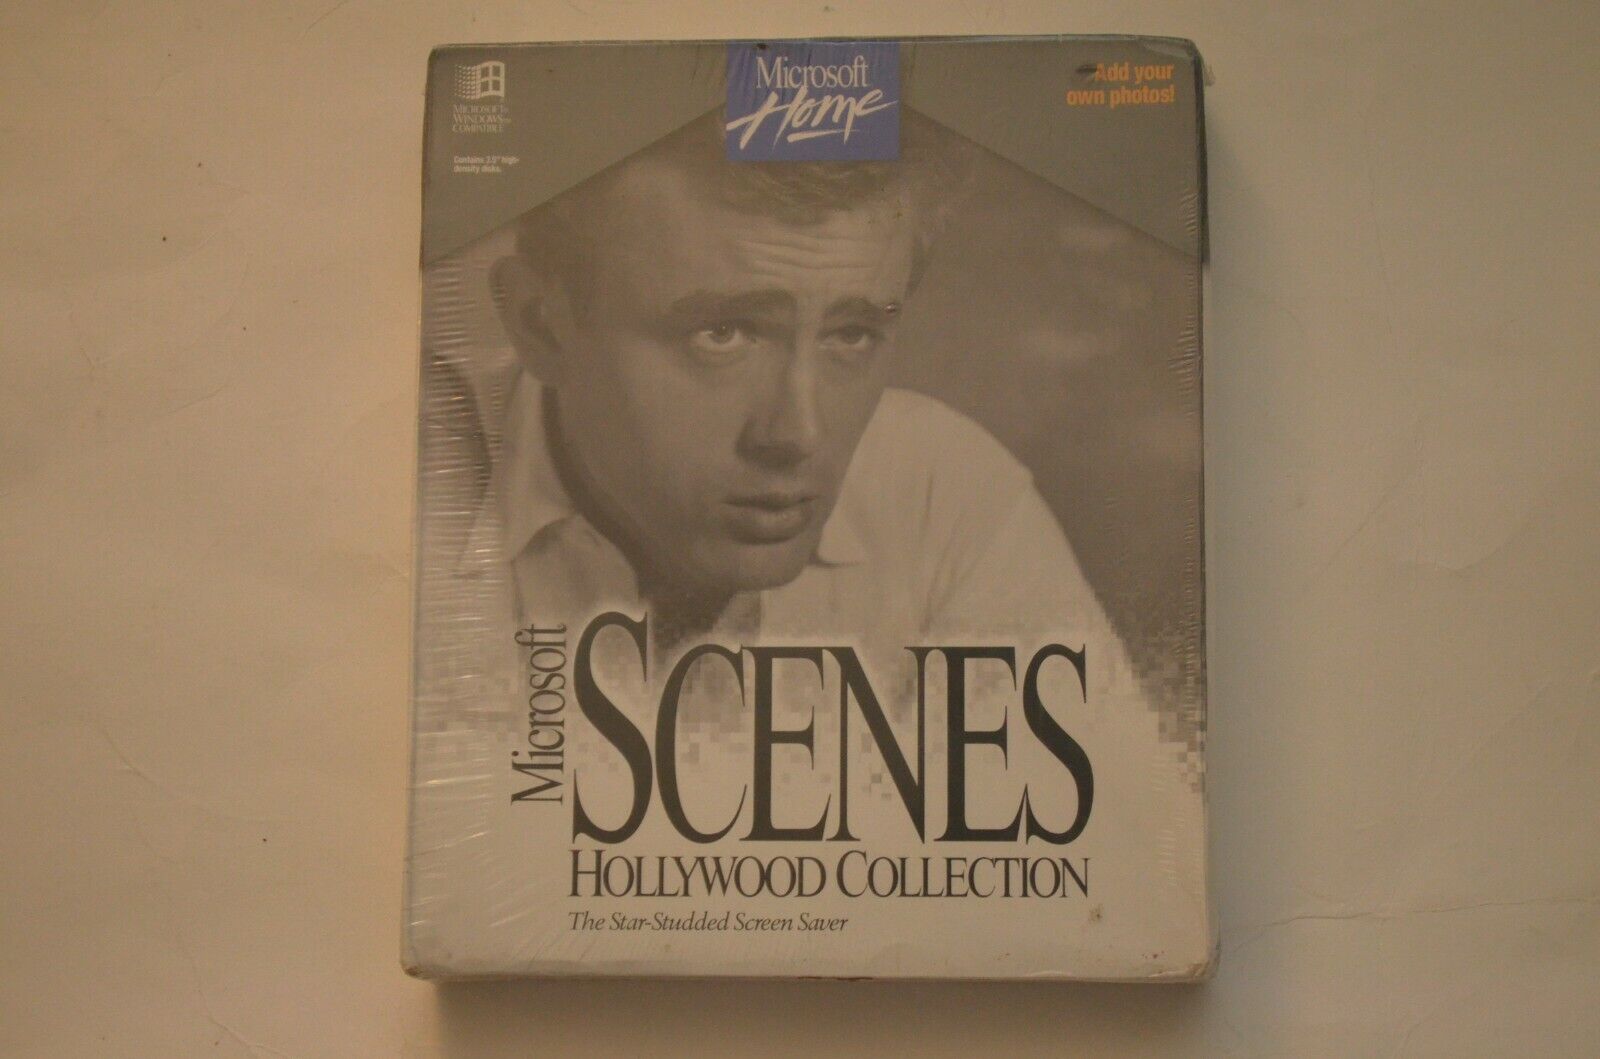 RARE Microsoft Scenes Hollywood Collection The Star Studded Screen Saver Sealed